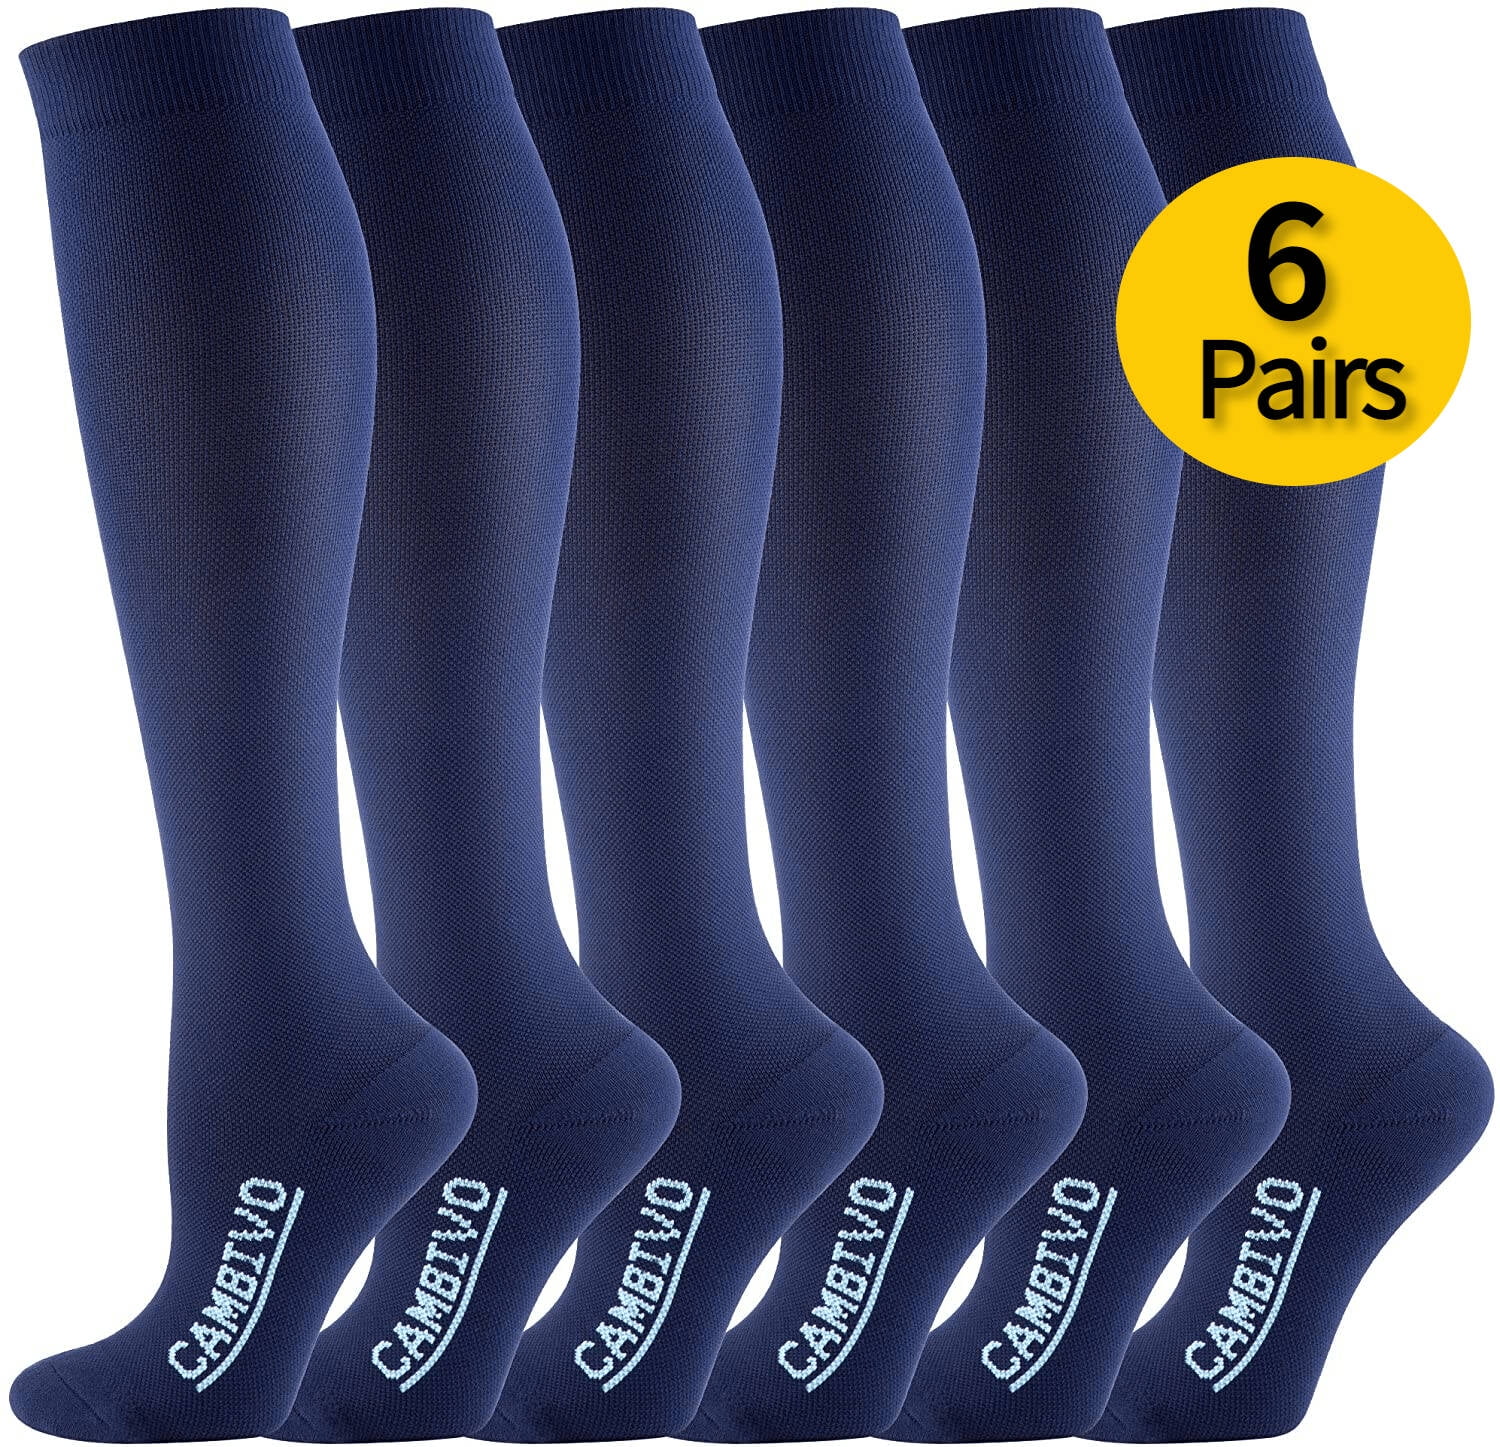 CAMBIVO Compression Socks for Women and Men, 6 Pairs Compression